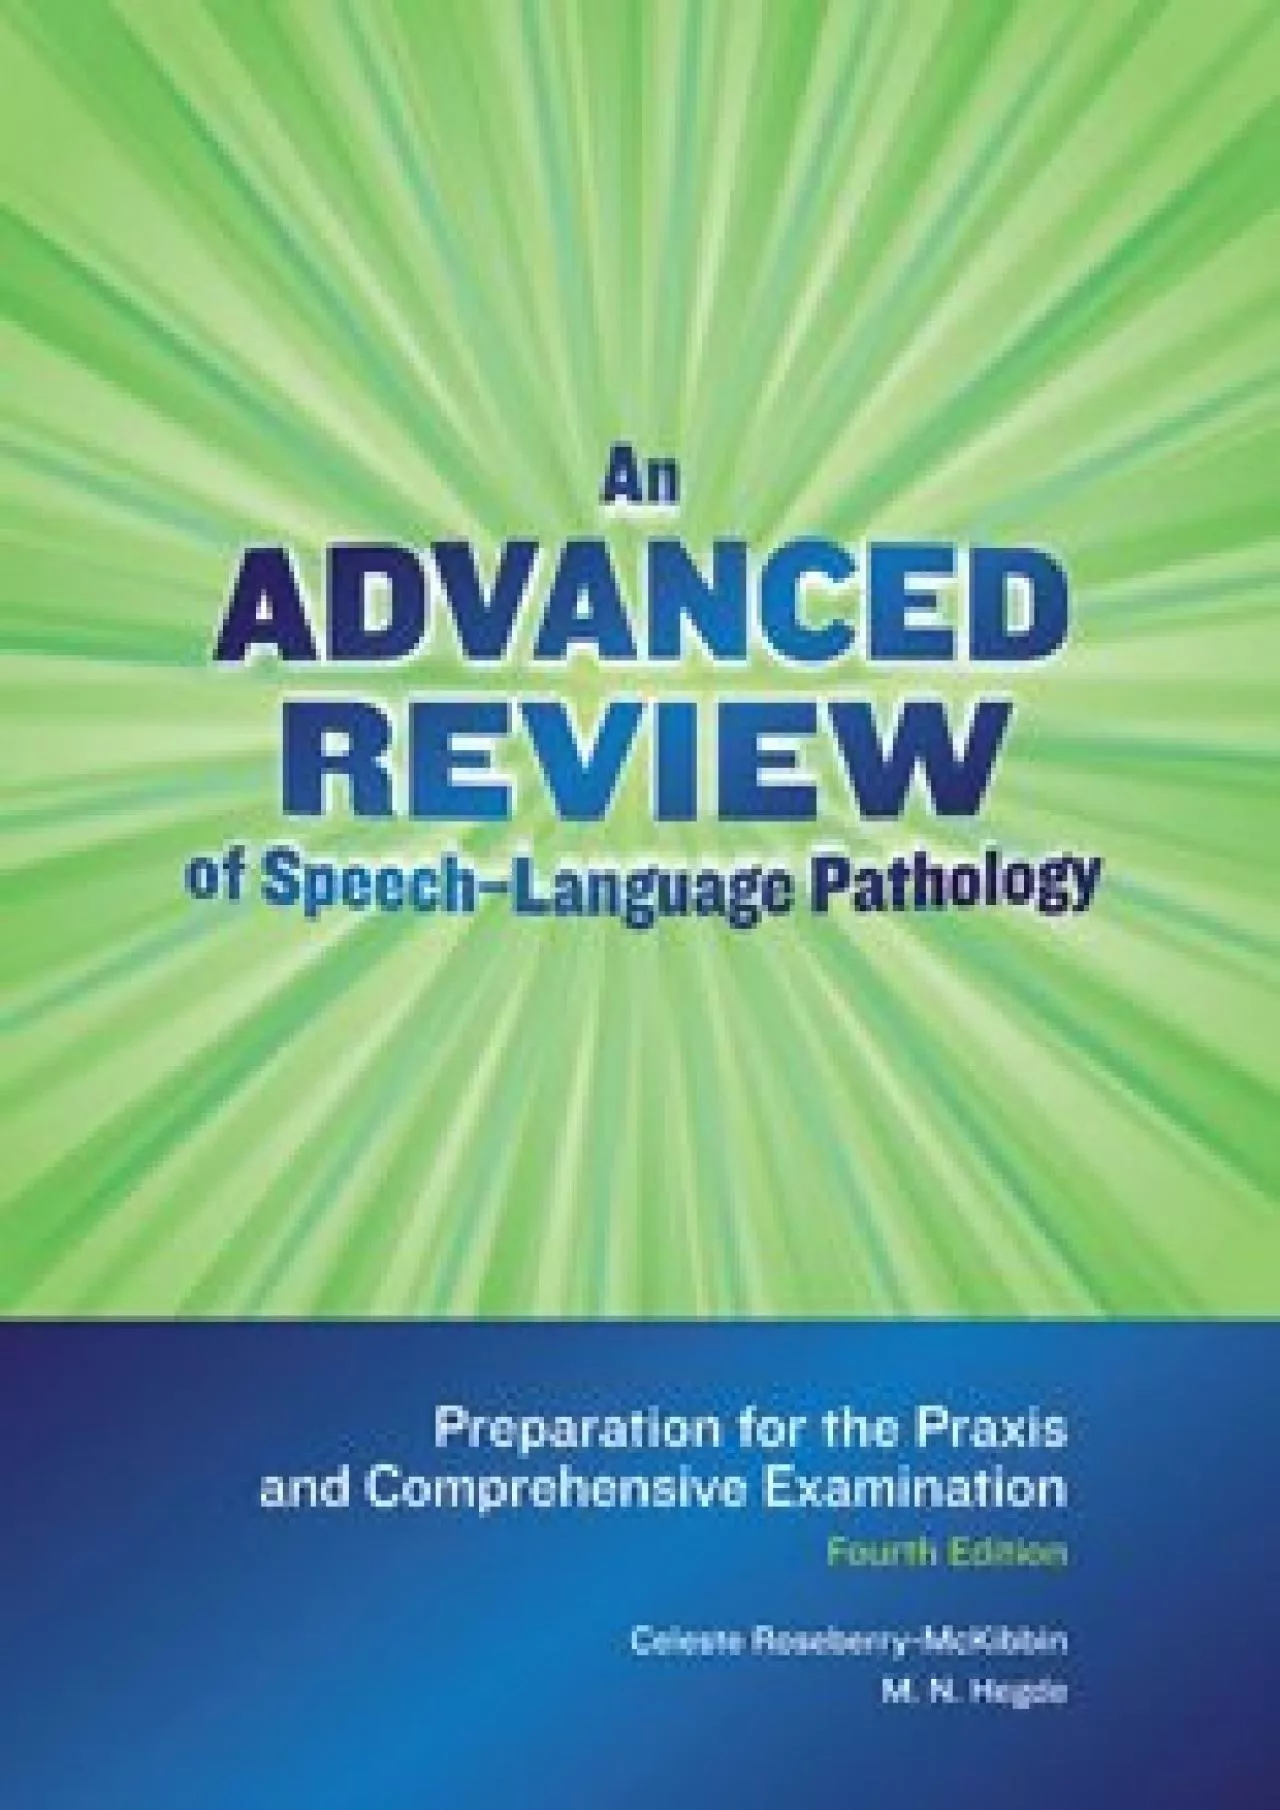 (EBOOK)-An Advanced Review of Speech-language Pathology: Preparation for the Praxis and